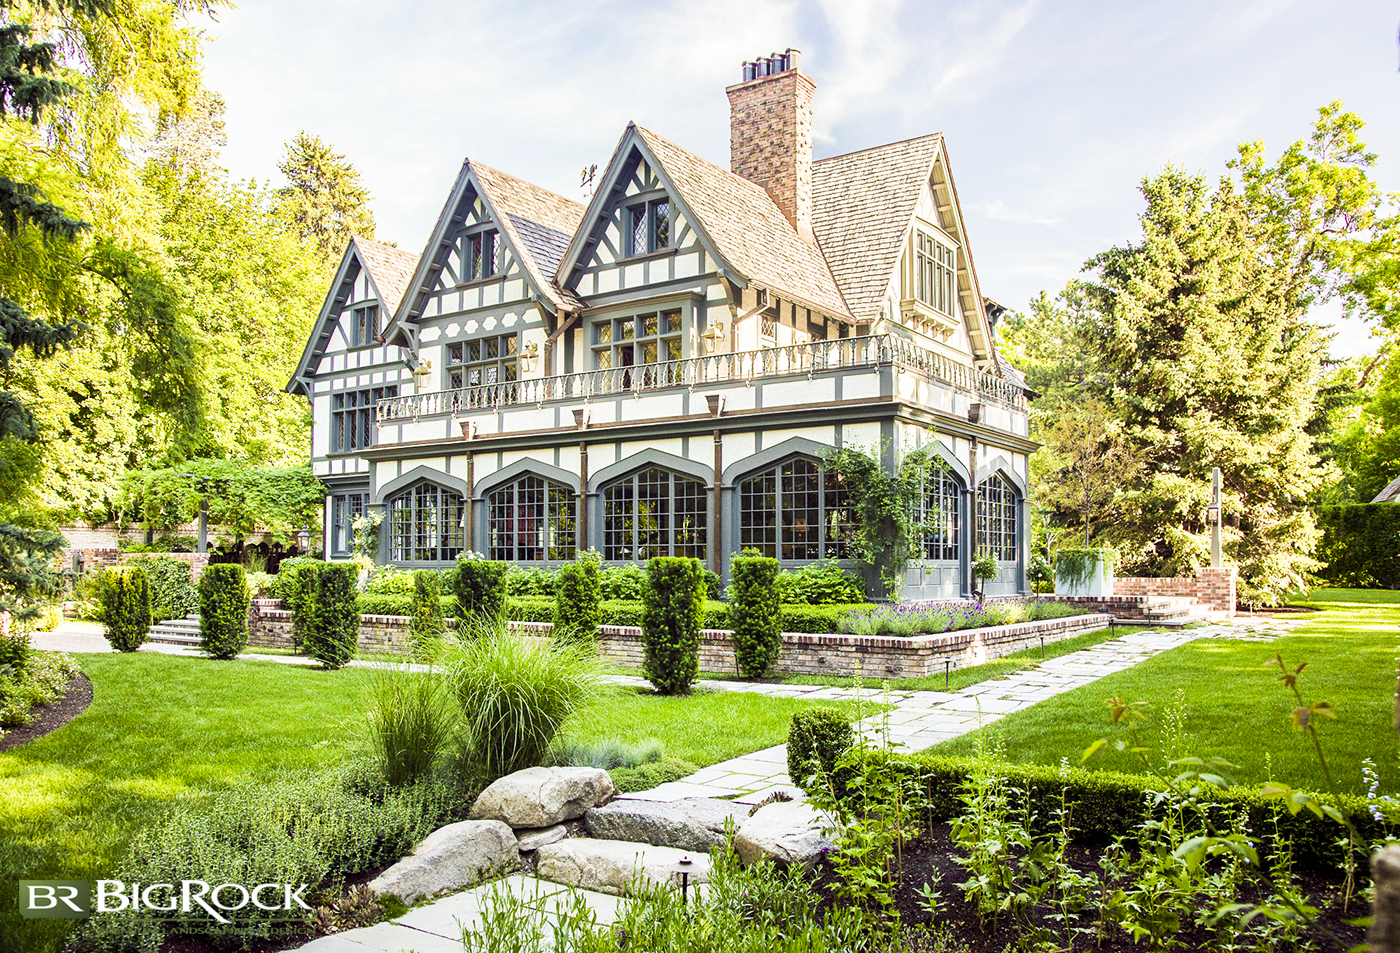 Luxury landscaping isn’t just measured by the number of dollars put into the project. Learn what 5 things make landscape design luxurious and what you need to know before hiring a high-end landscaping company yourself!